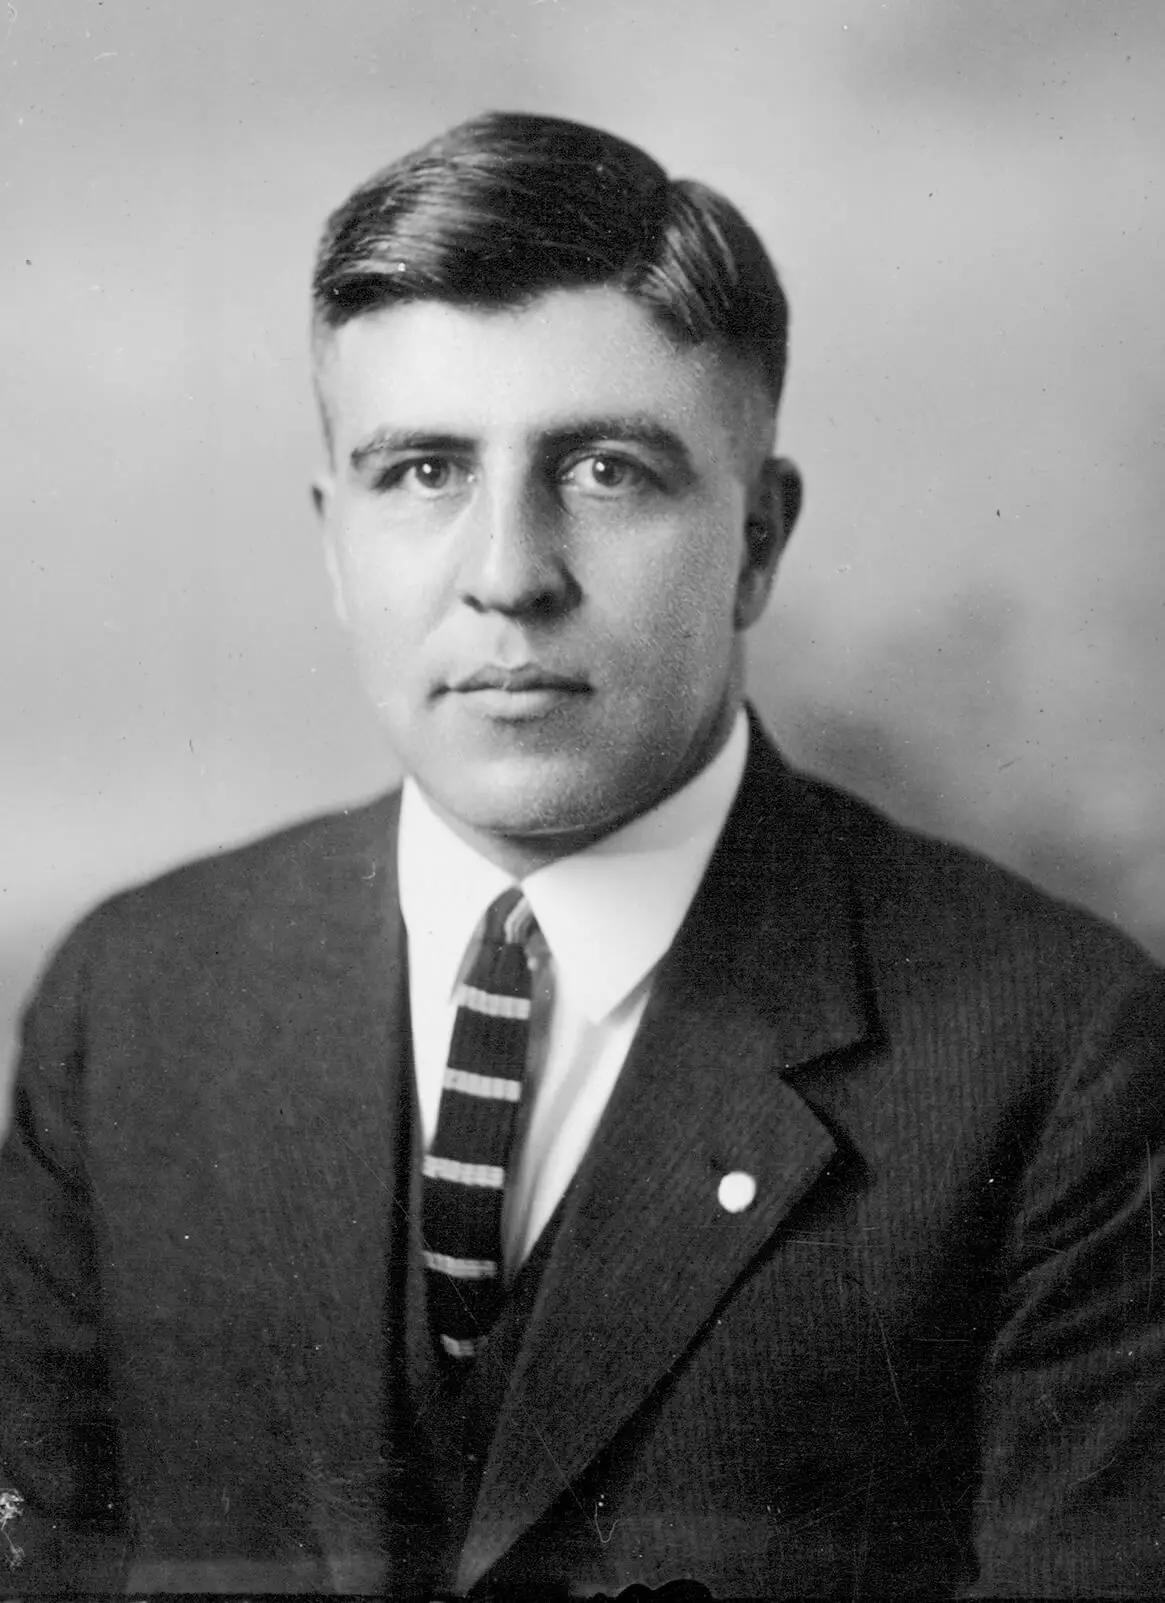 Portrait of a white man with combed dark hair, clean shaven face, striped tie, white shirt and black coat. He is looking into the camera with a straight face.